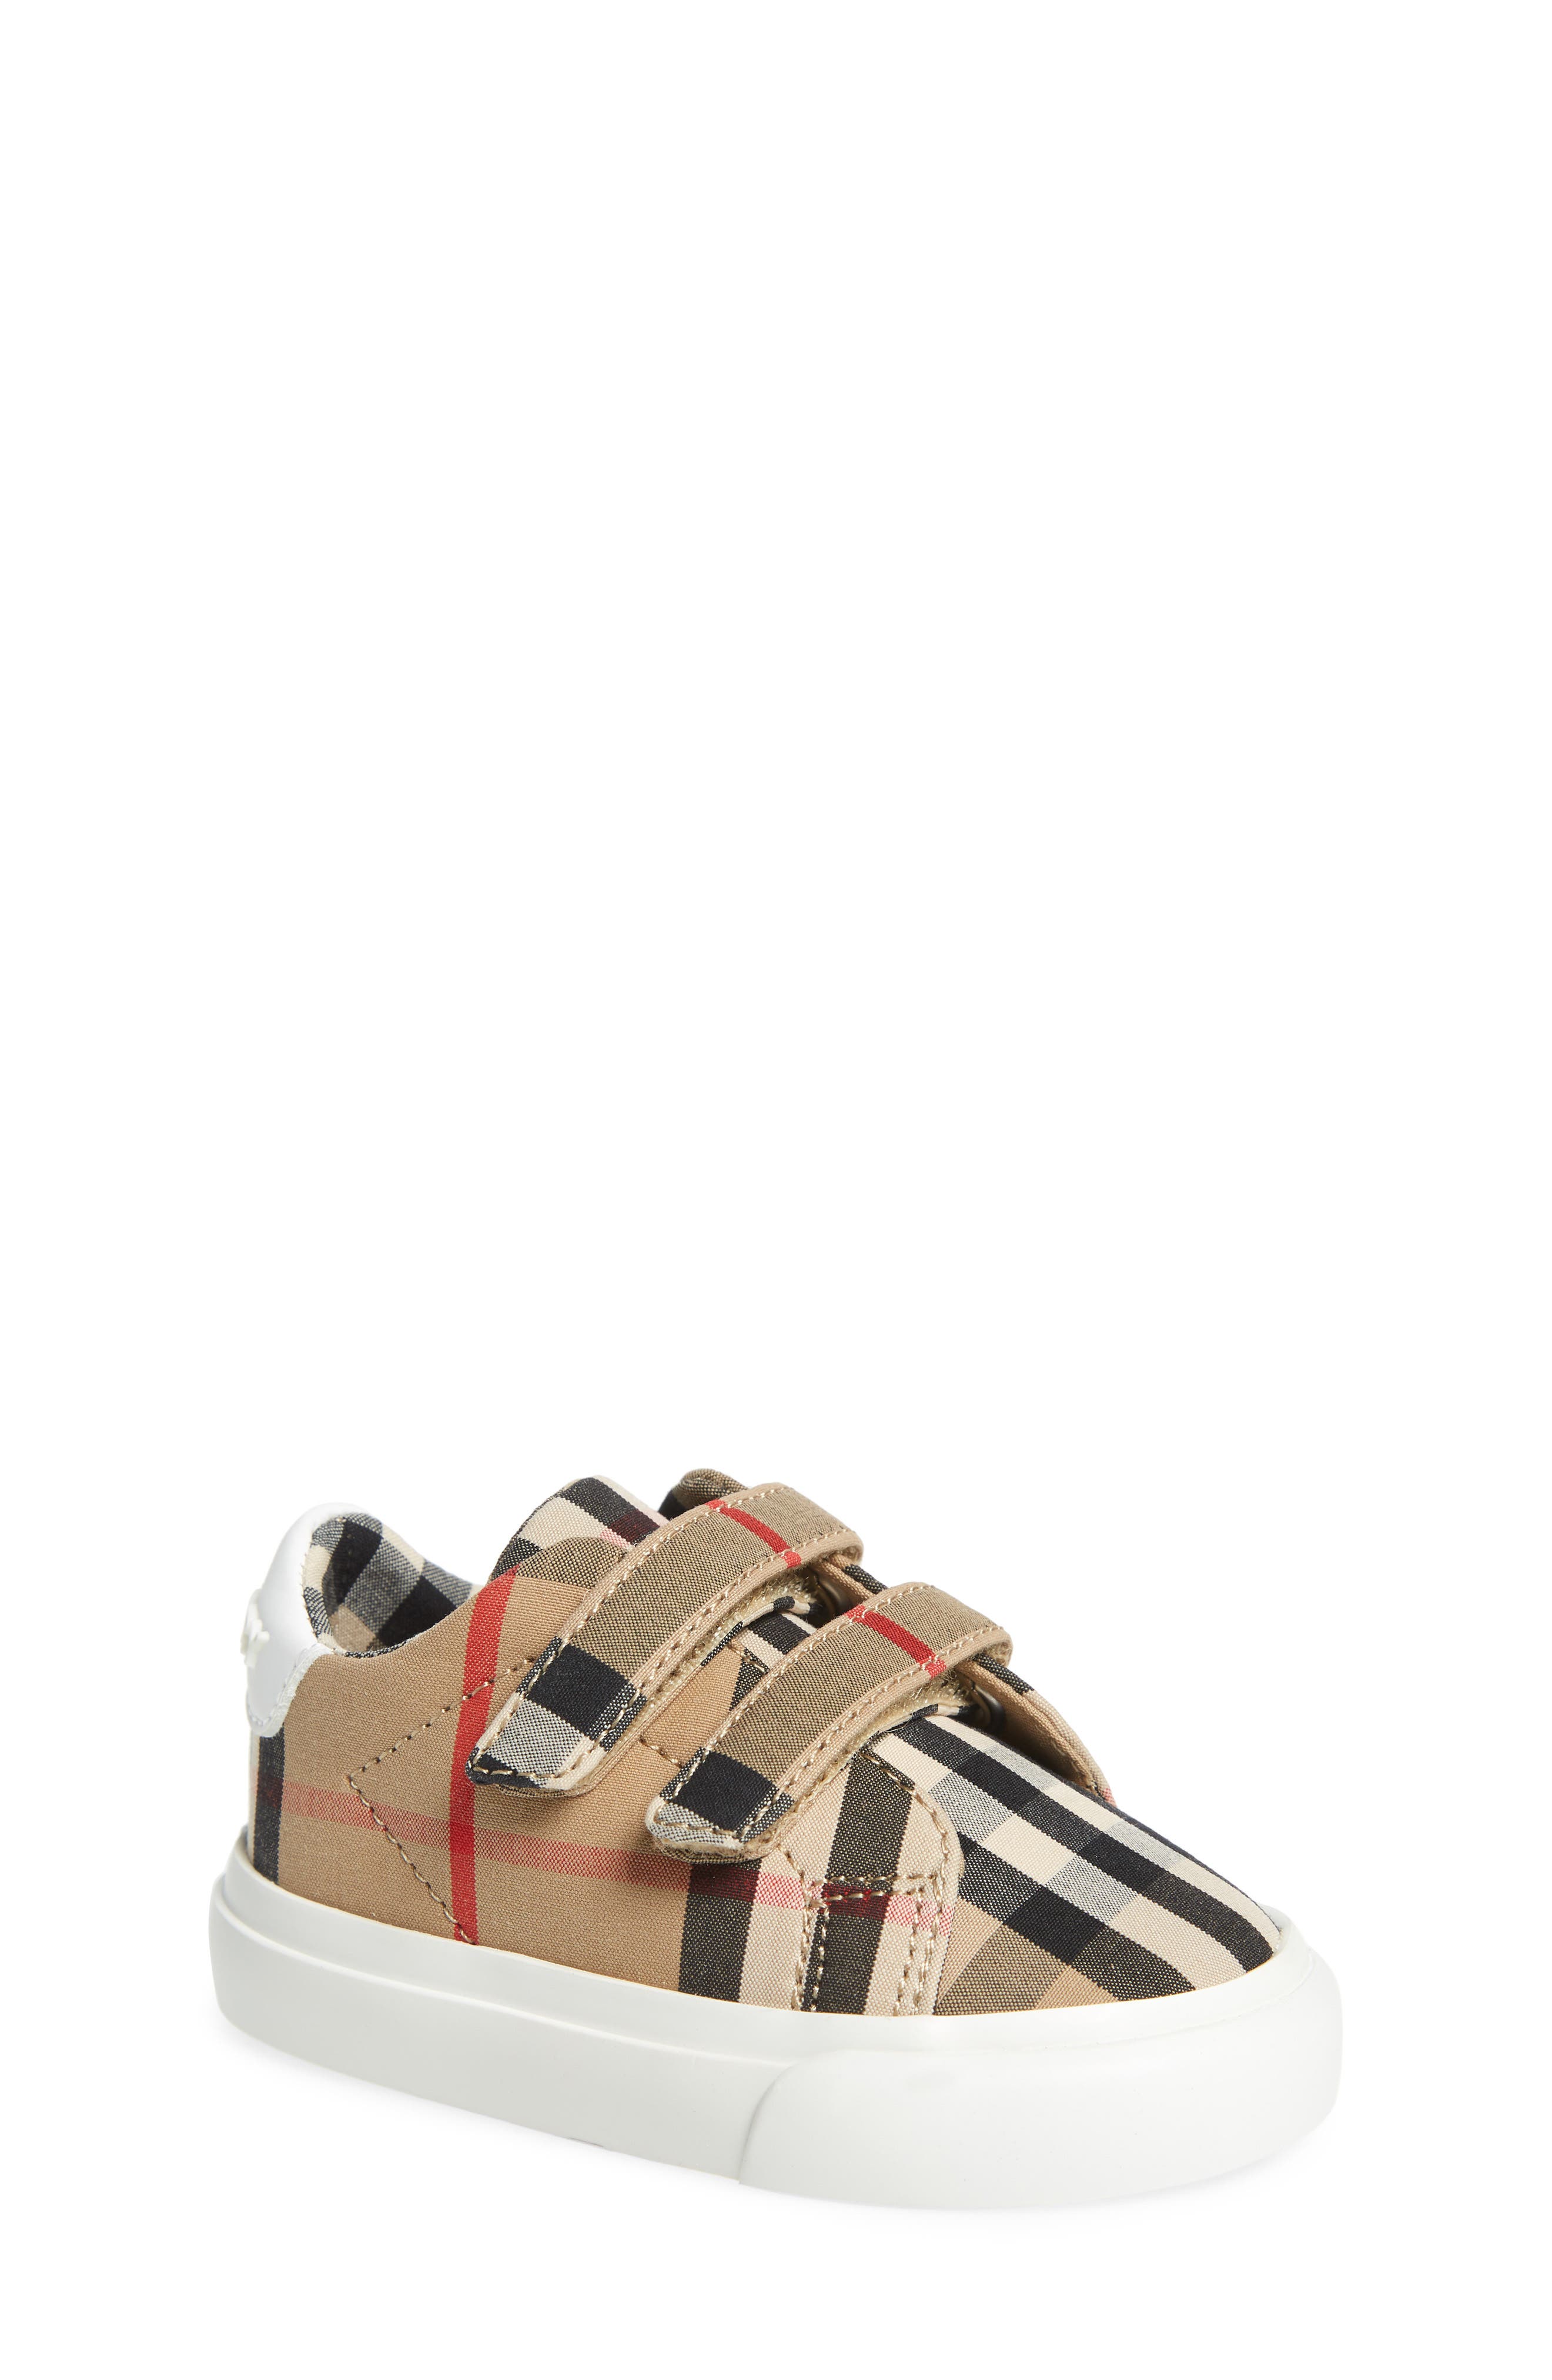 burberry girl shoes